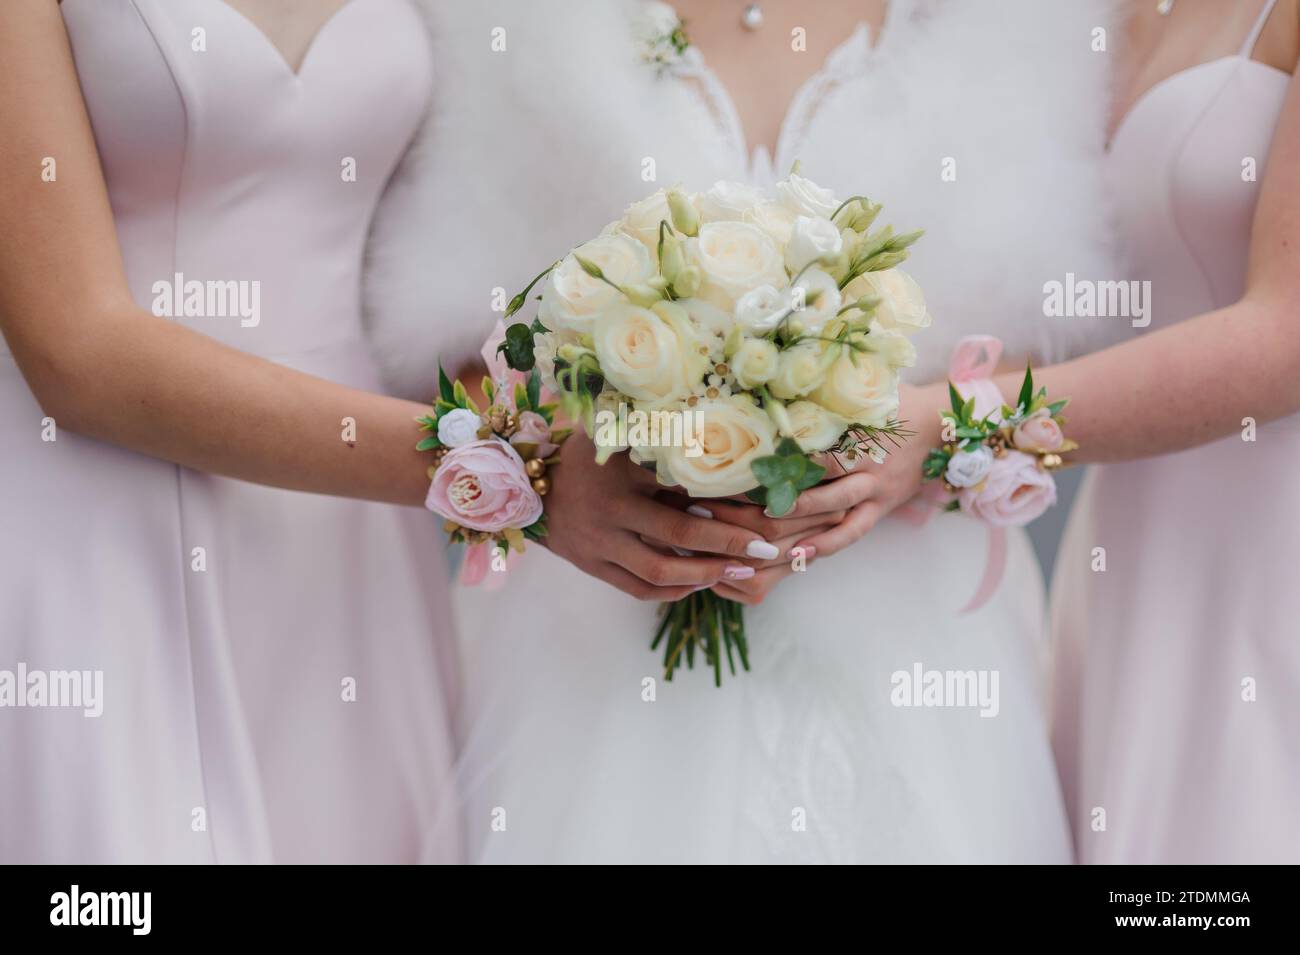 A beautiful wedding bouquet in the hands of the bride. Bouquet with white roses in the hands of the bride Stock Photo